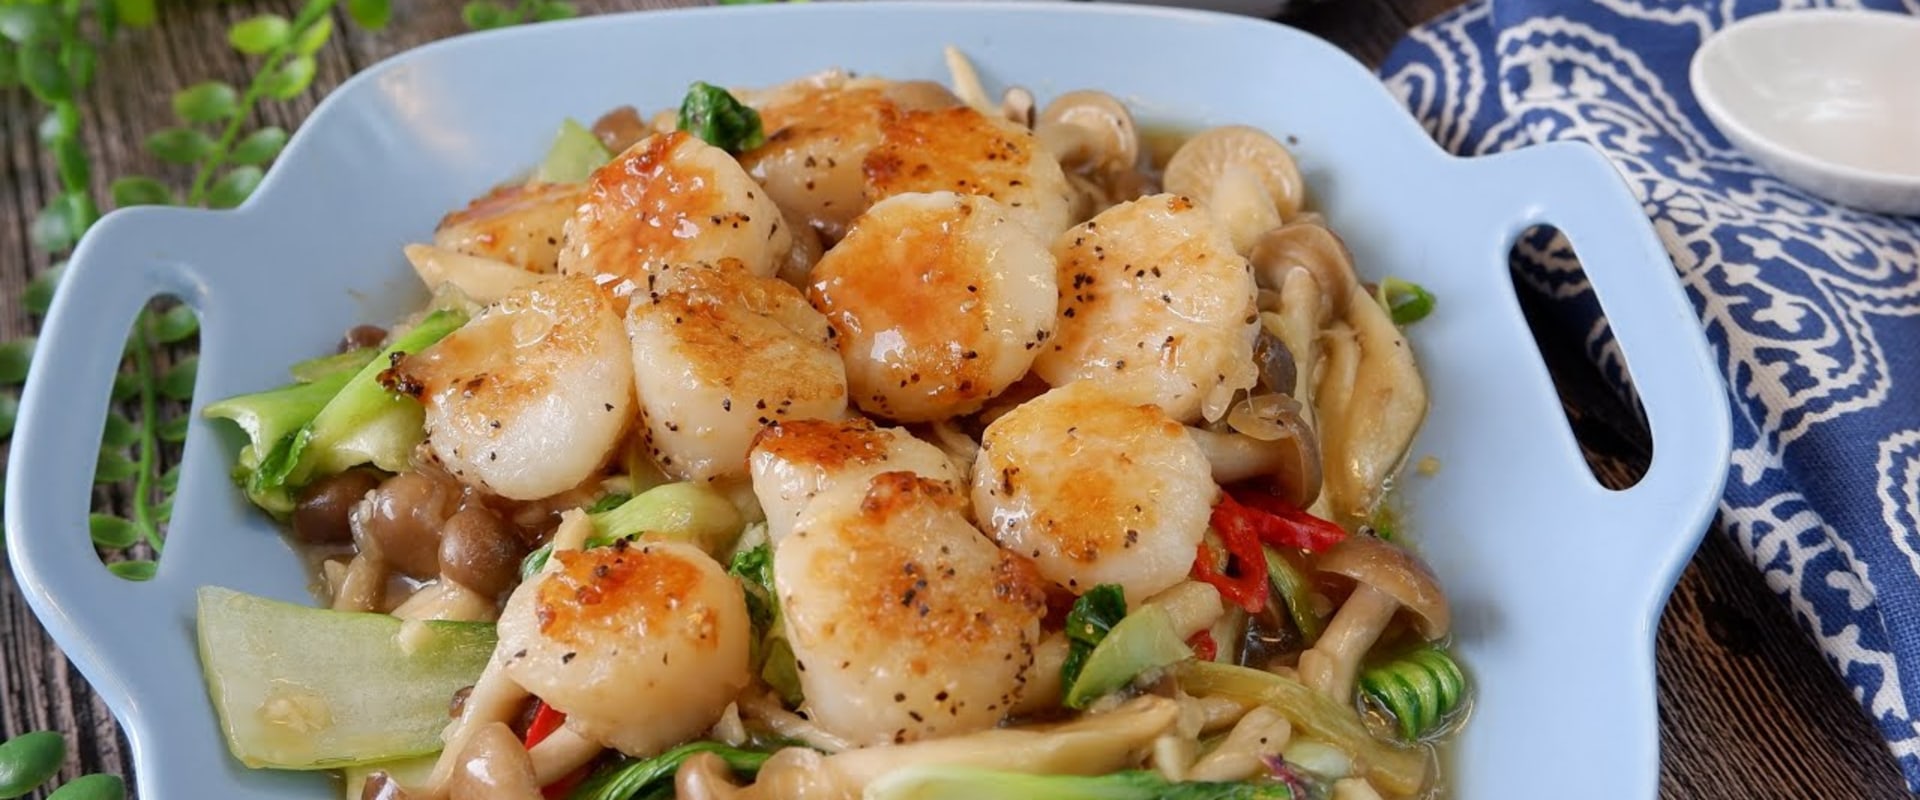 Scallop and Squid Stir Fry with Vegetables: A Delicious Recipe for Chinese Cuisine Enthusiasts